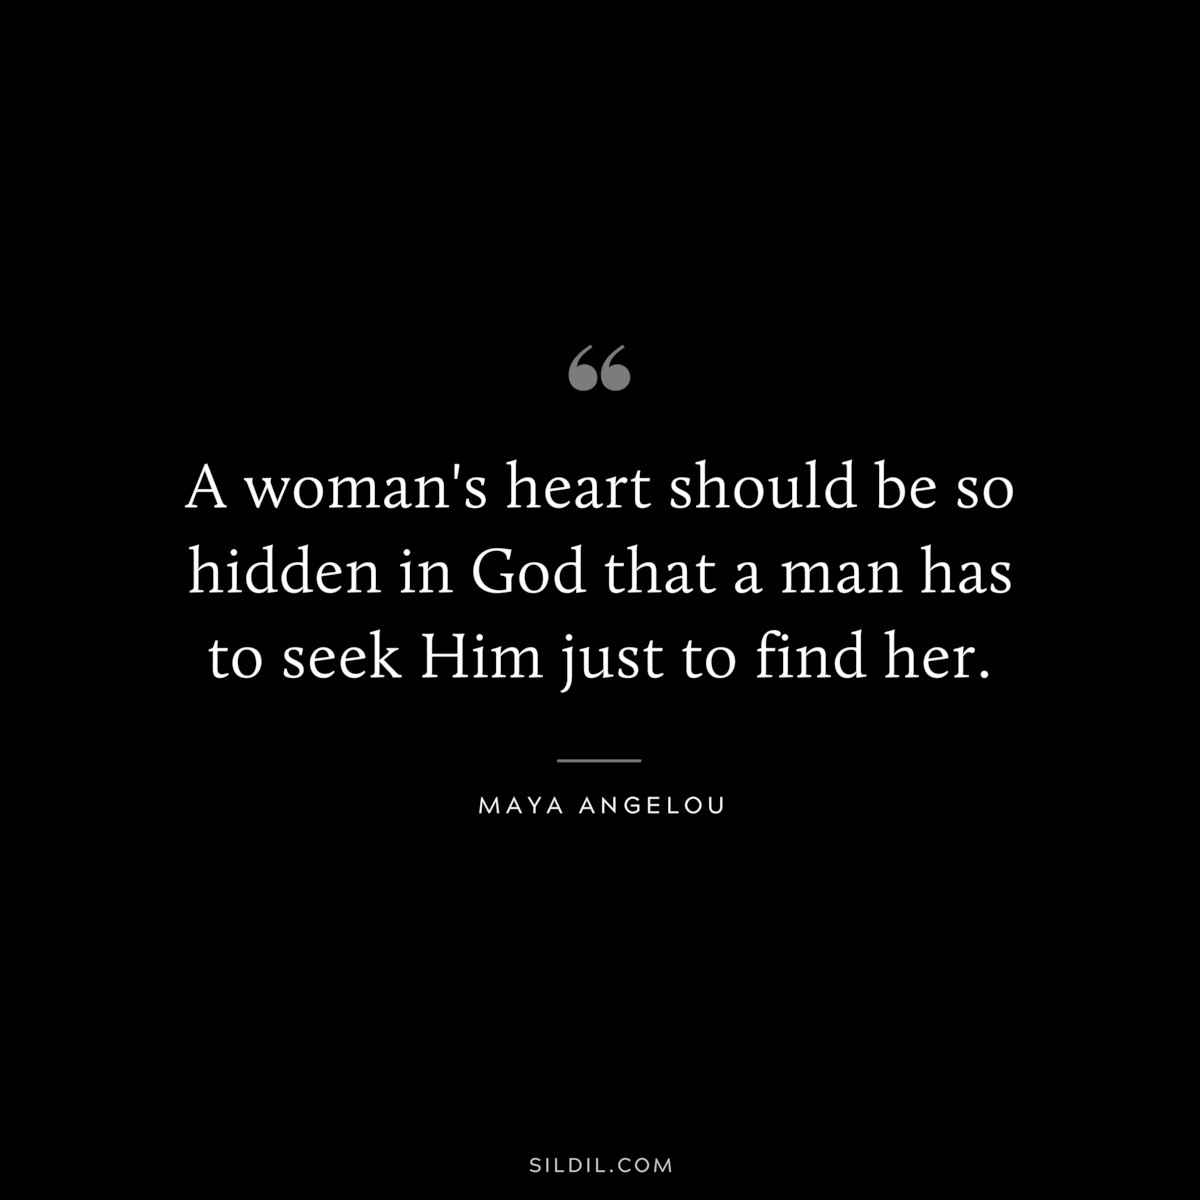 A woman's heart should be so hidden in God that a man has to seek Him just to find her. ― Maya Angelou